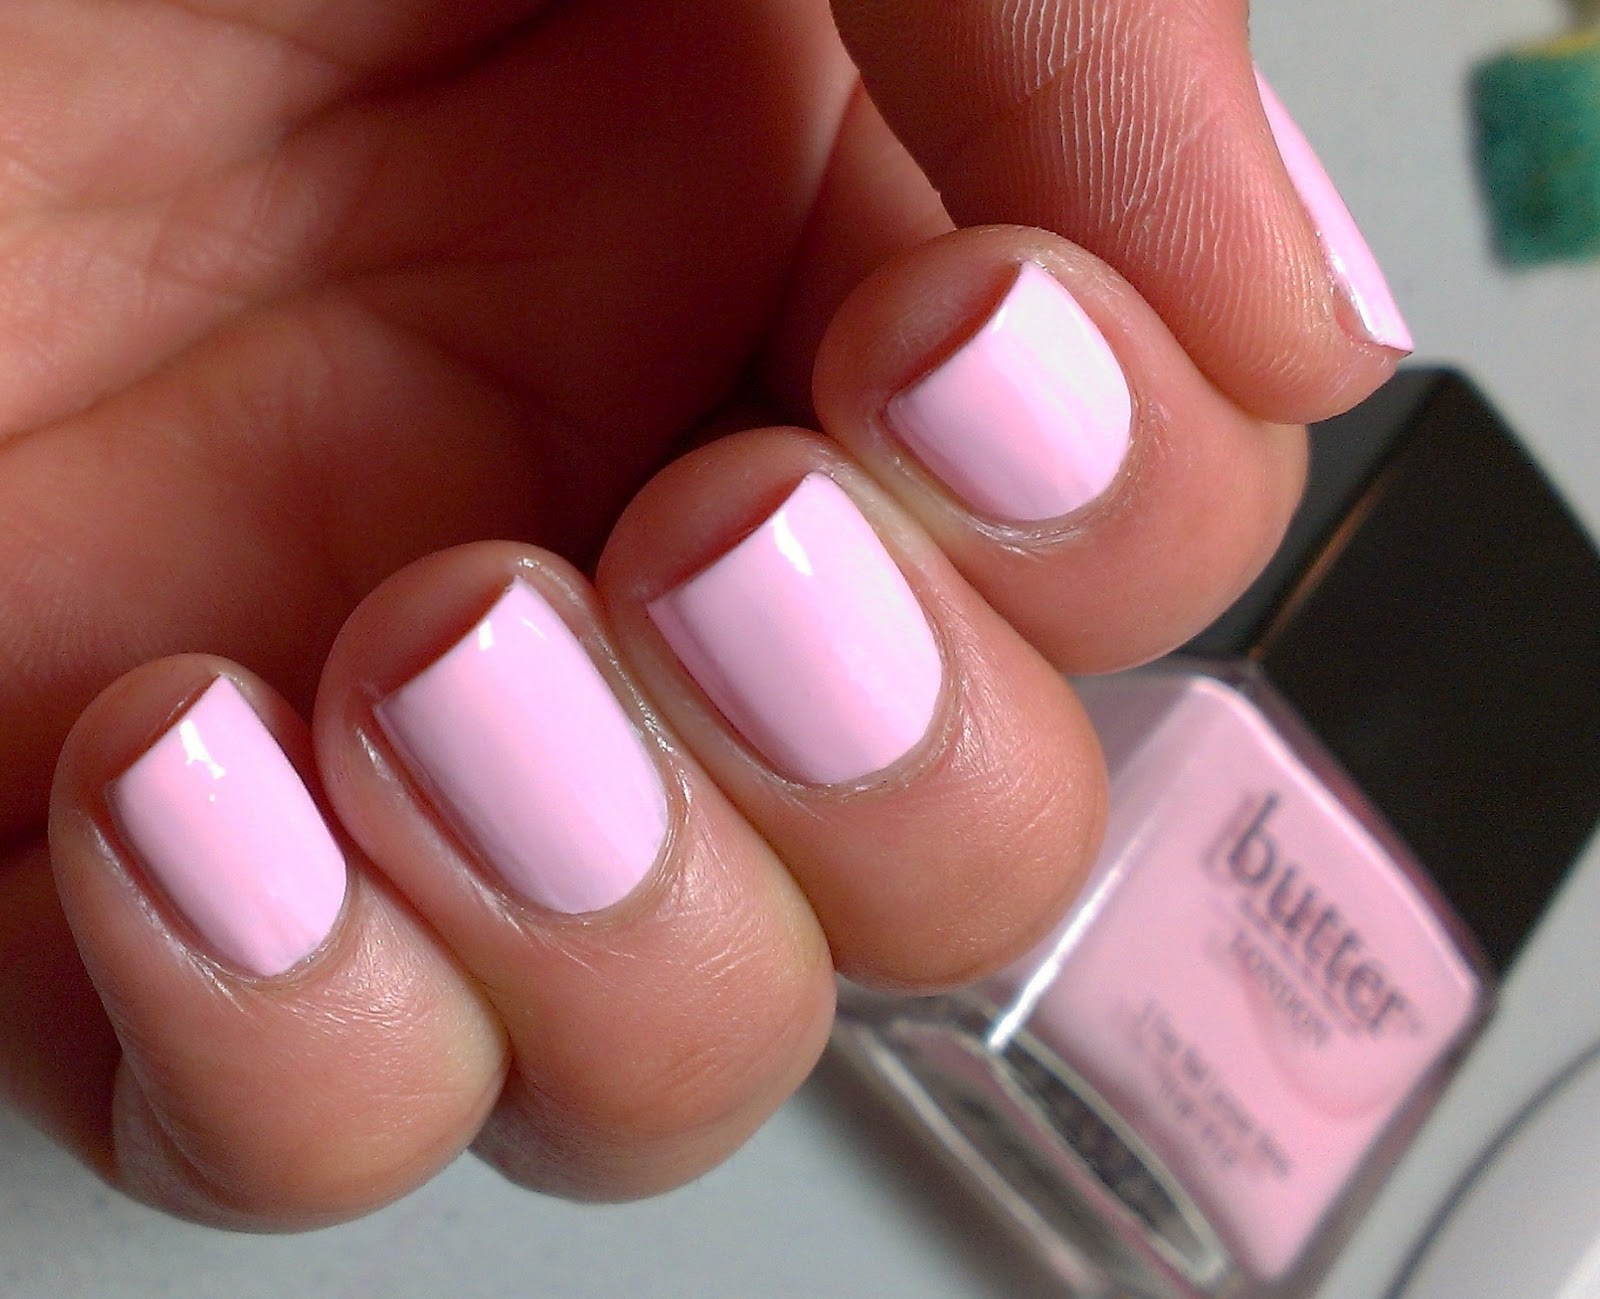 Butter London Nail Lacquer in Teddy Girl - wide 4